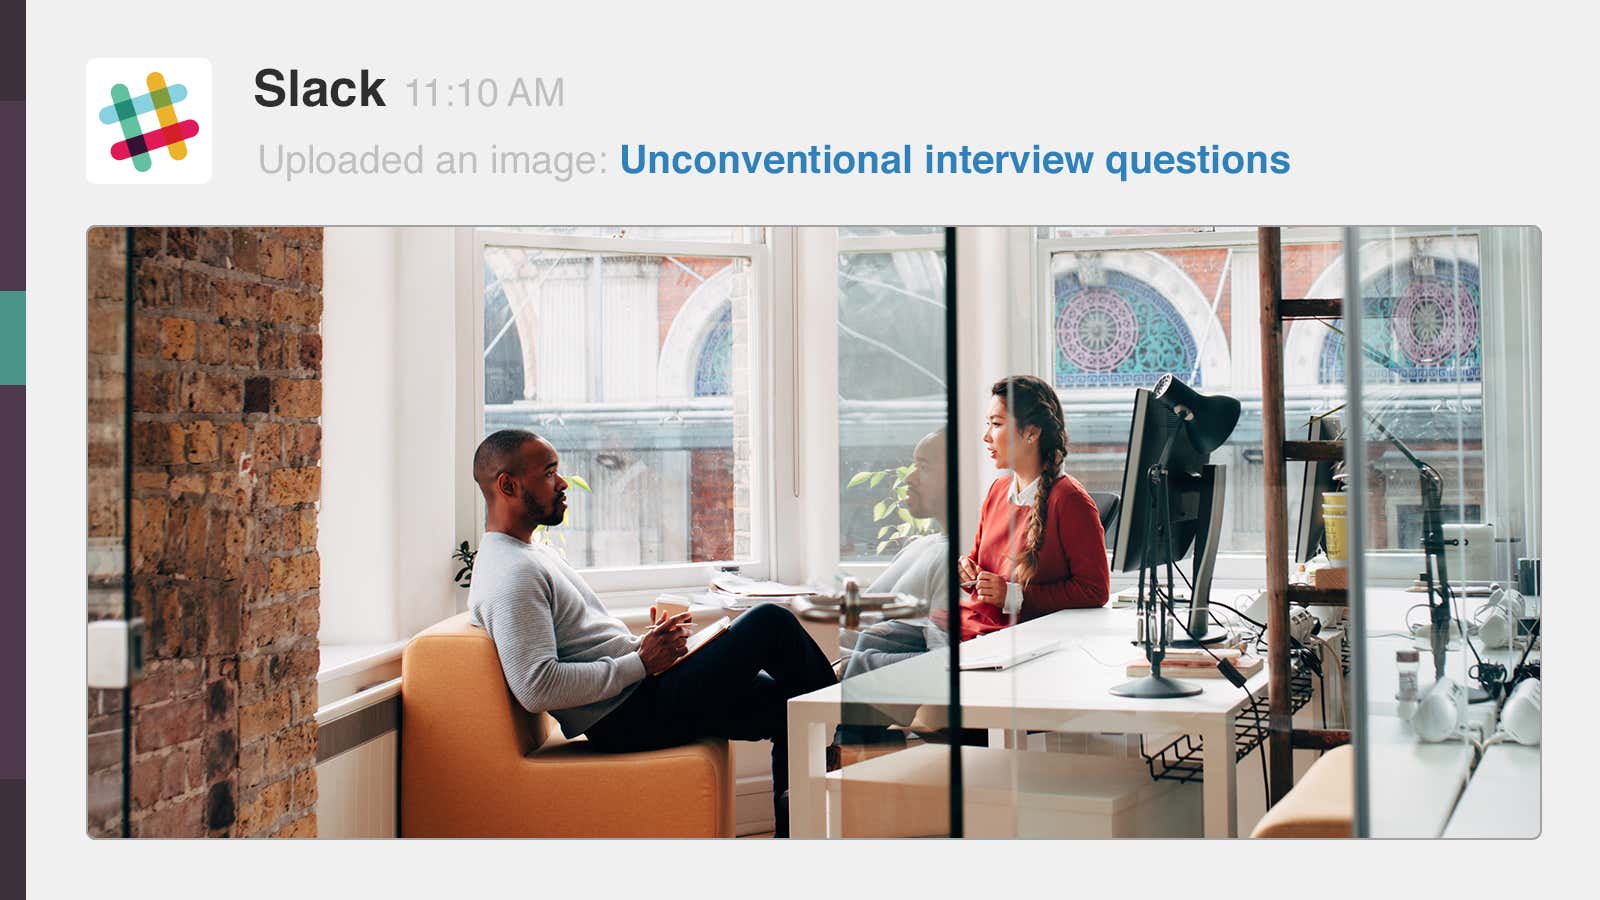 Three unconventional interview questions